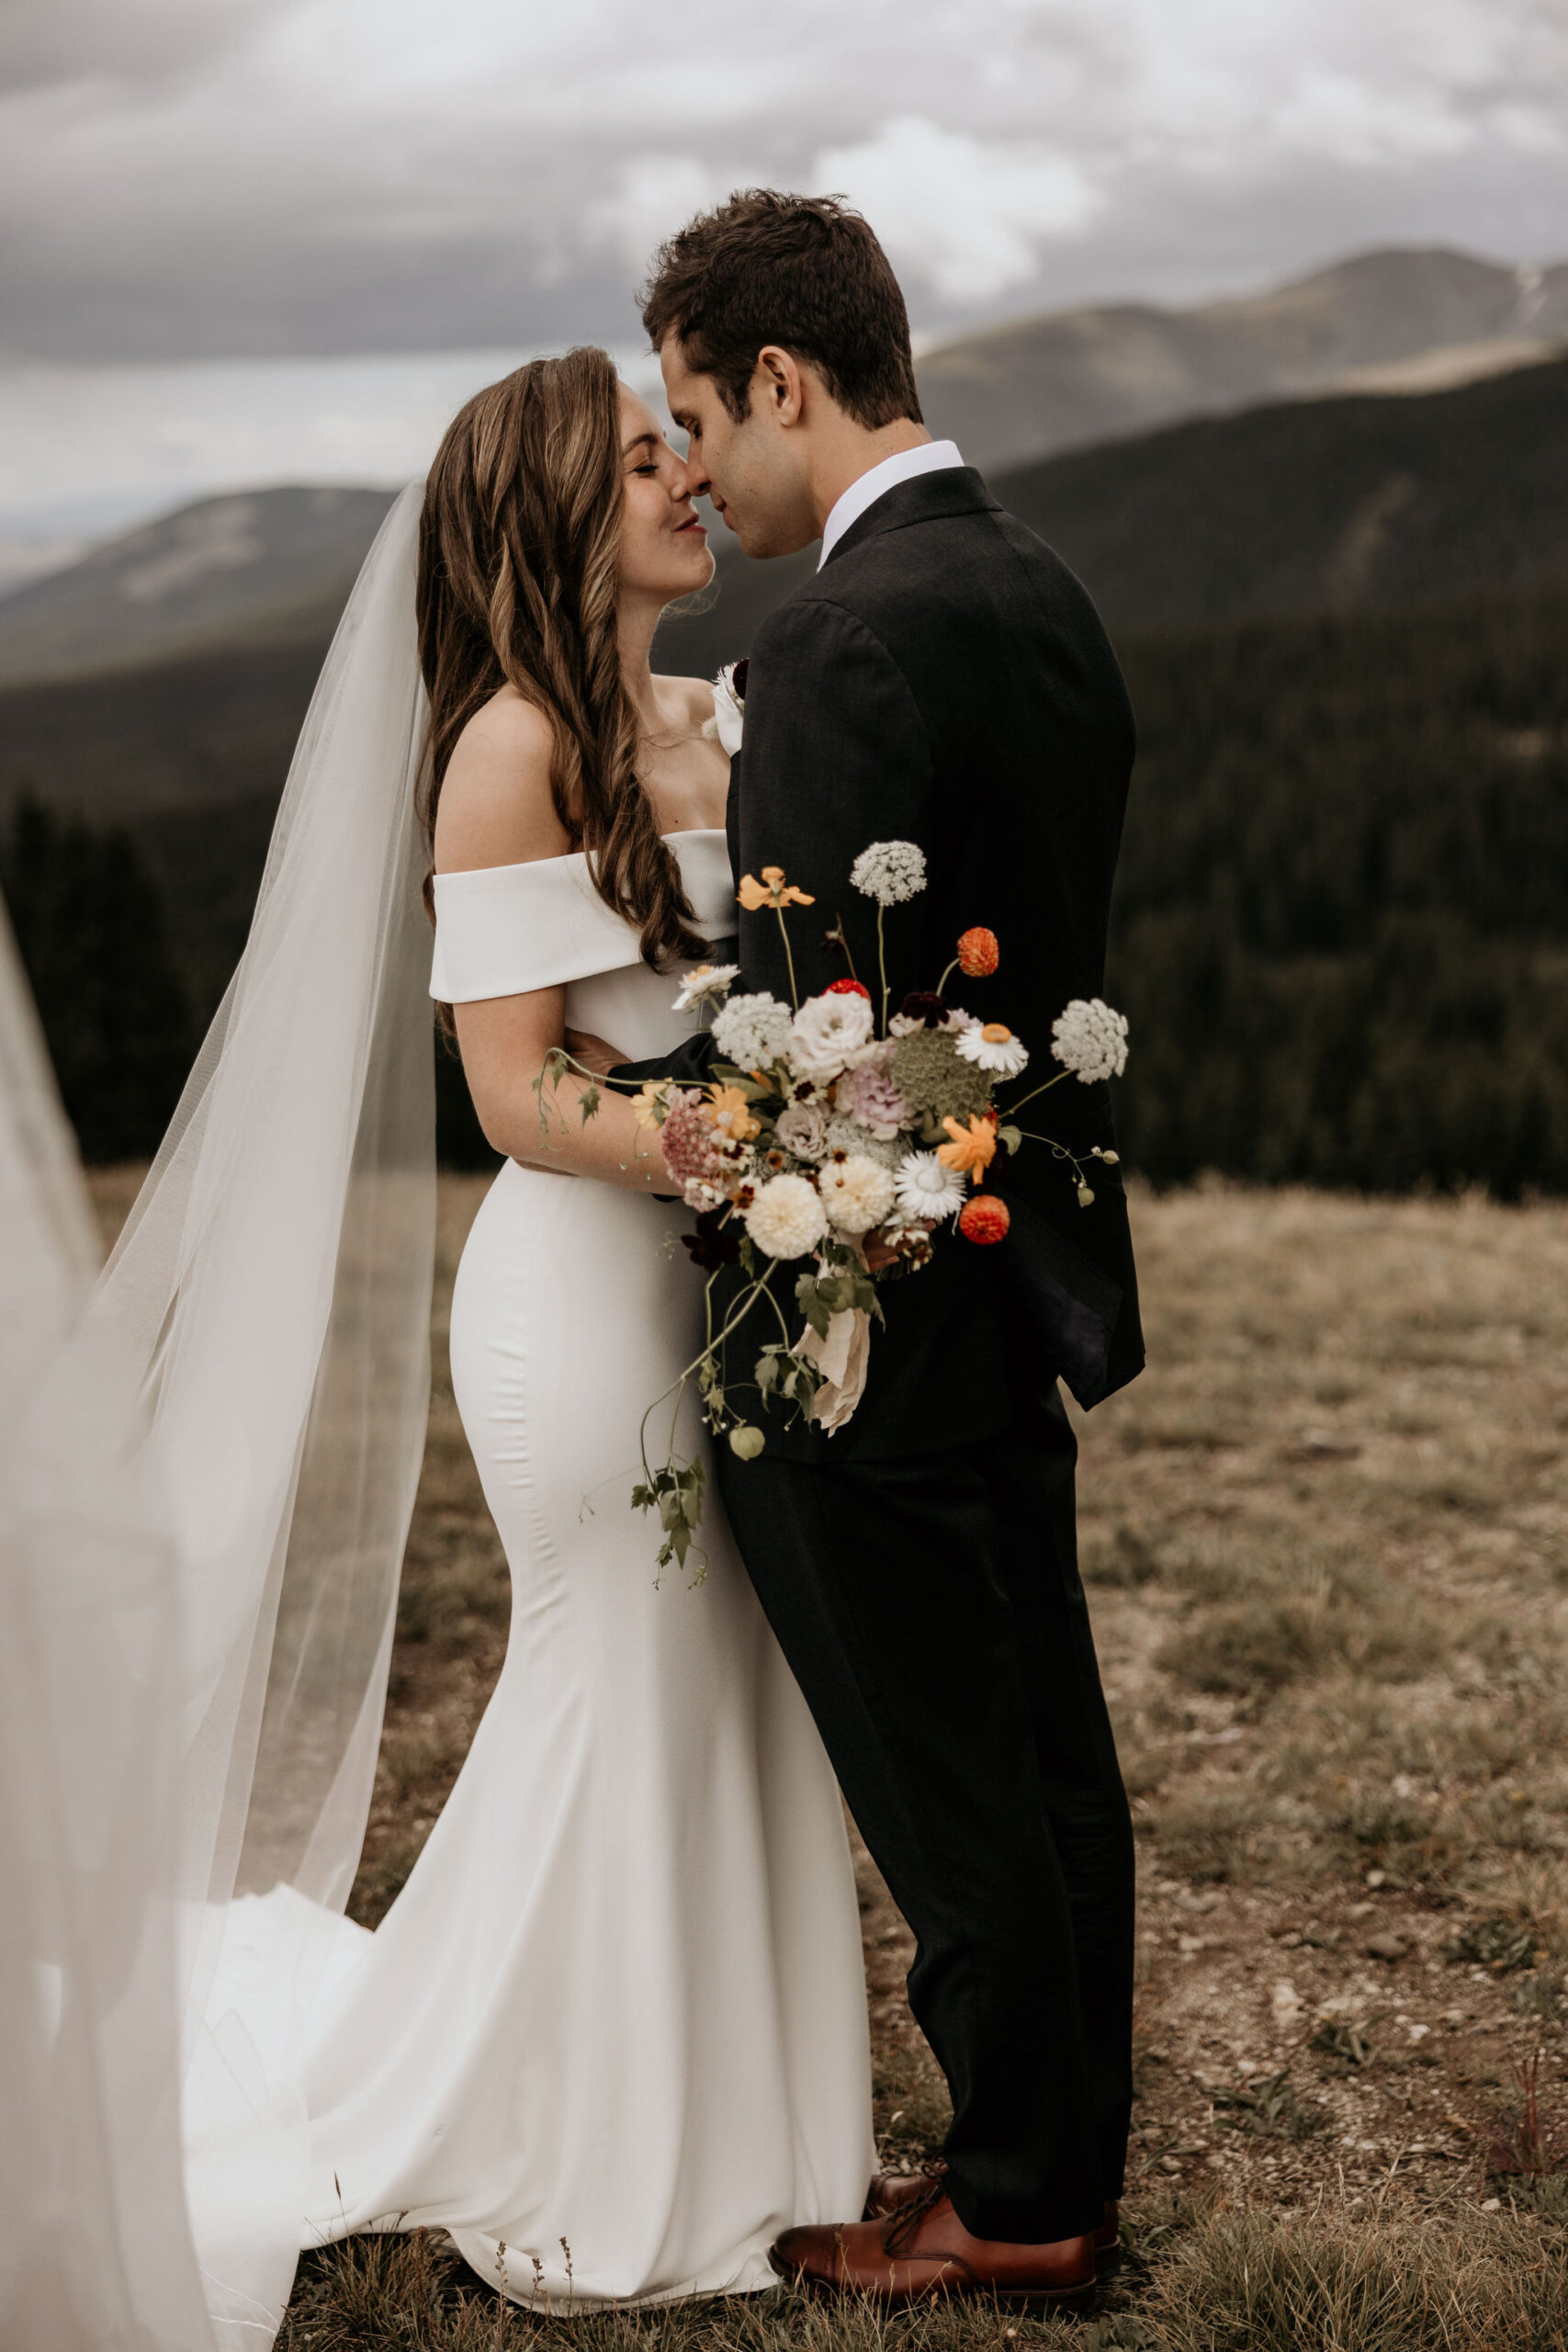 Bride and groom put faces near each other during colorado wedding photo shoot.